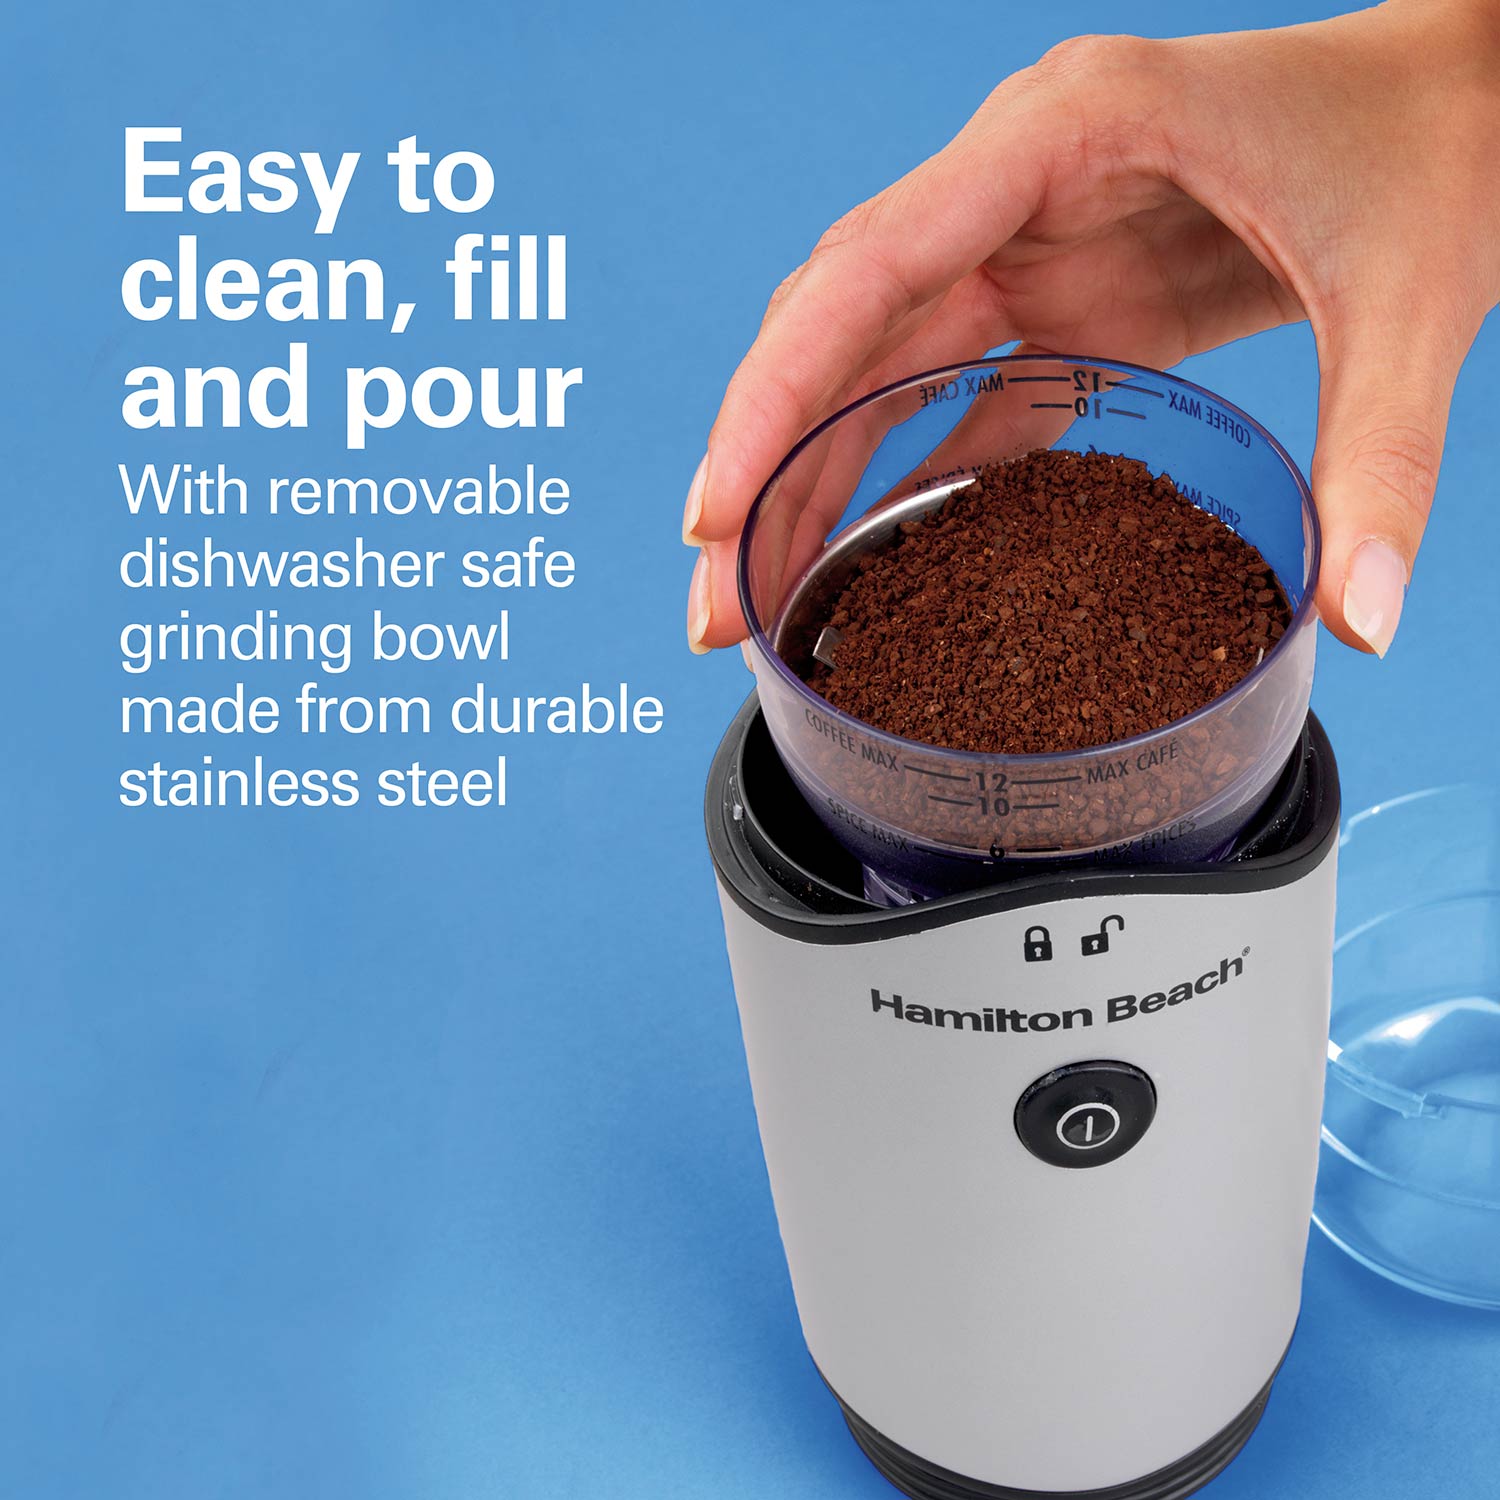  Kaffe Electric Coffee Bean Grinder w/Removable Cup